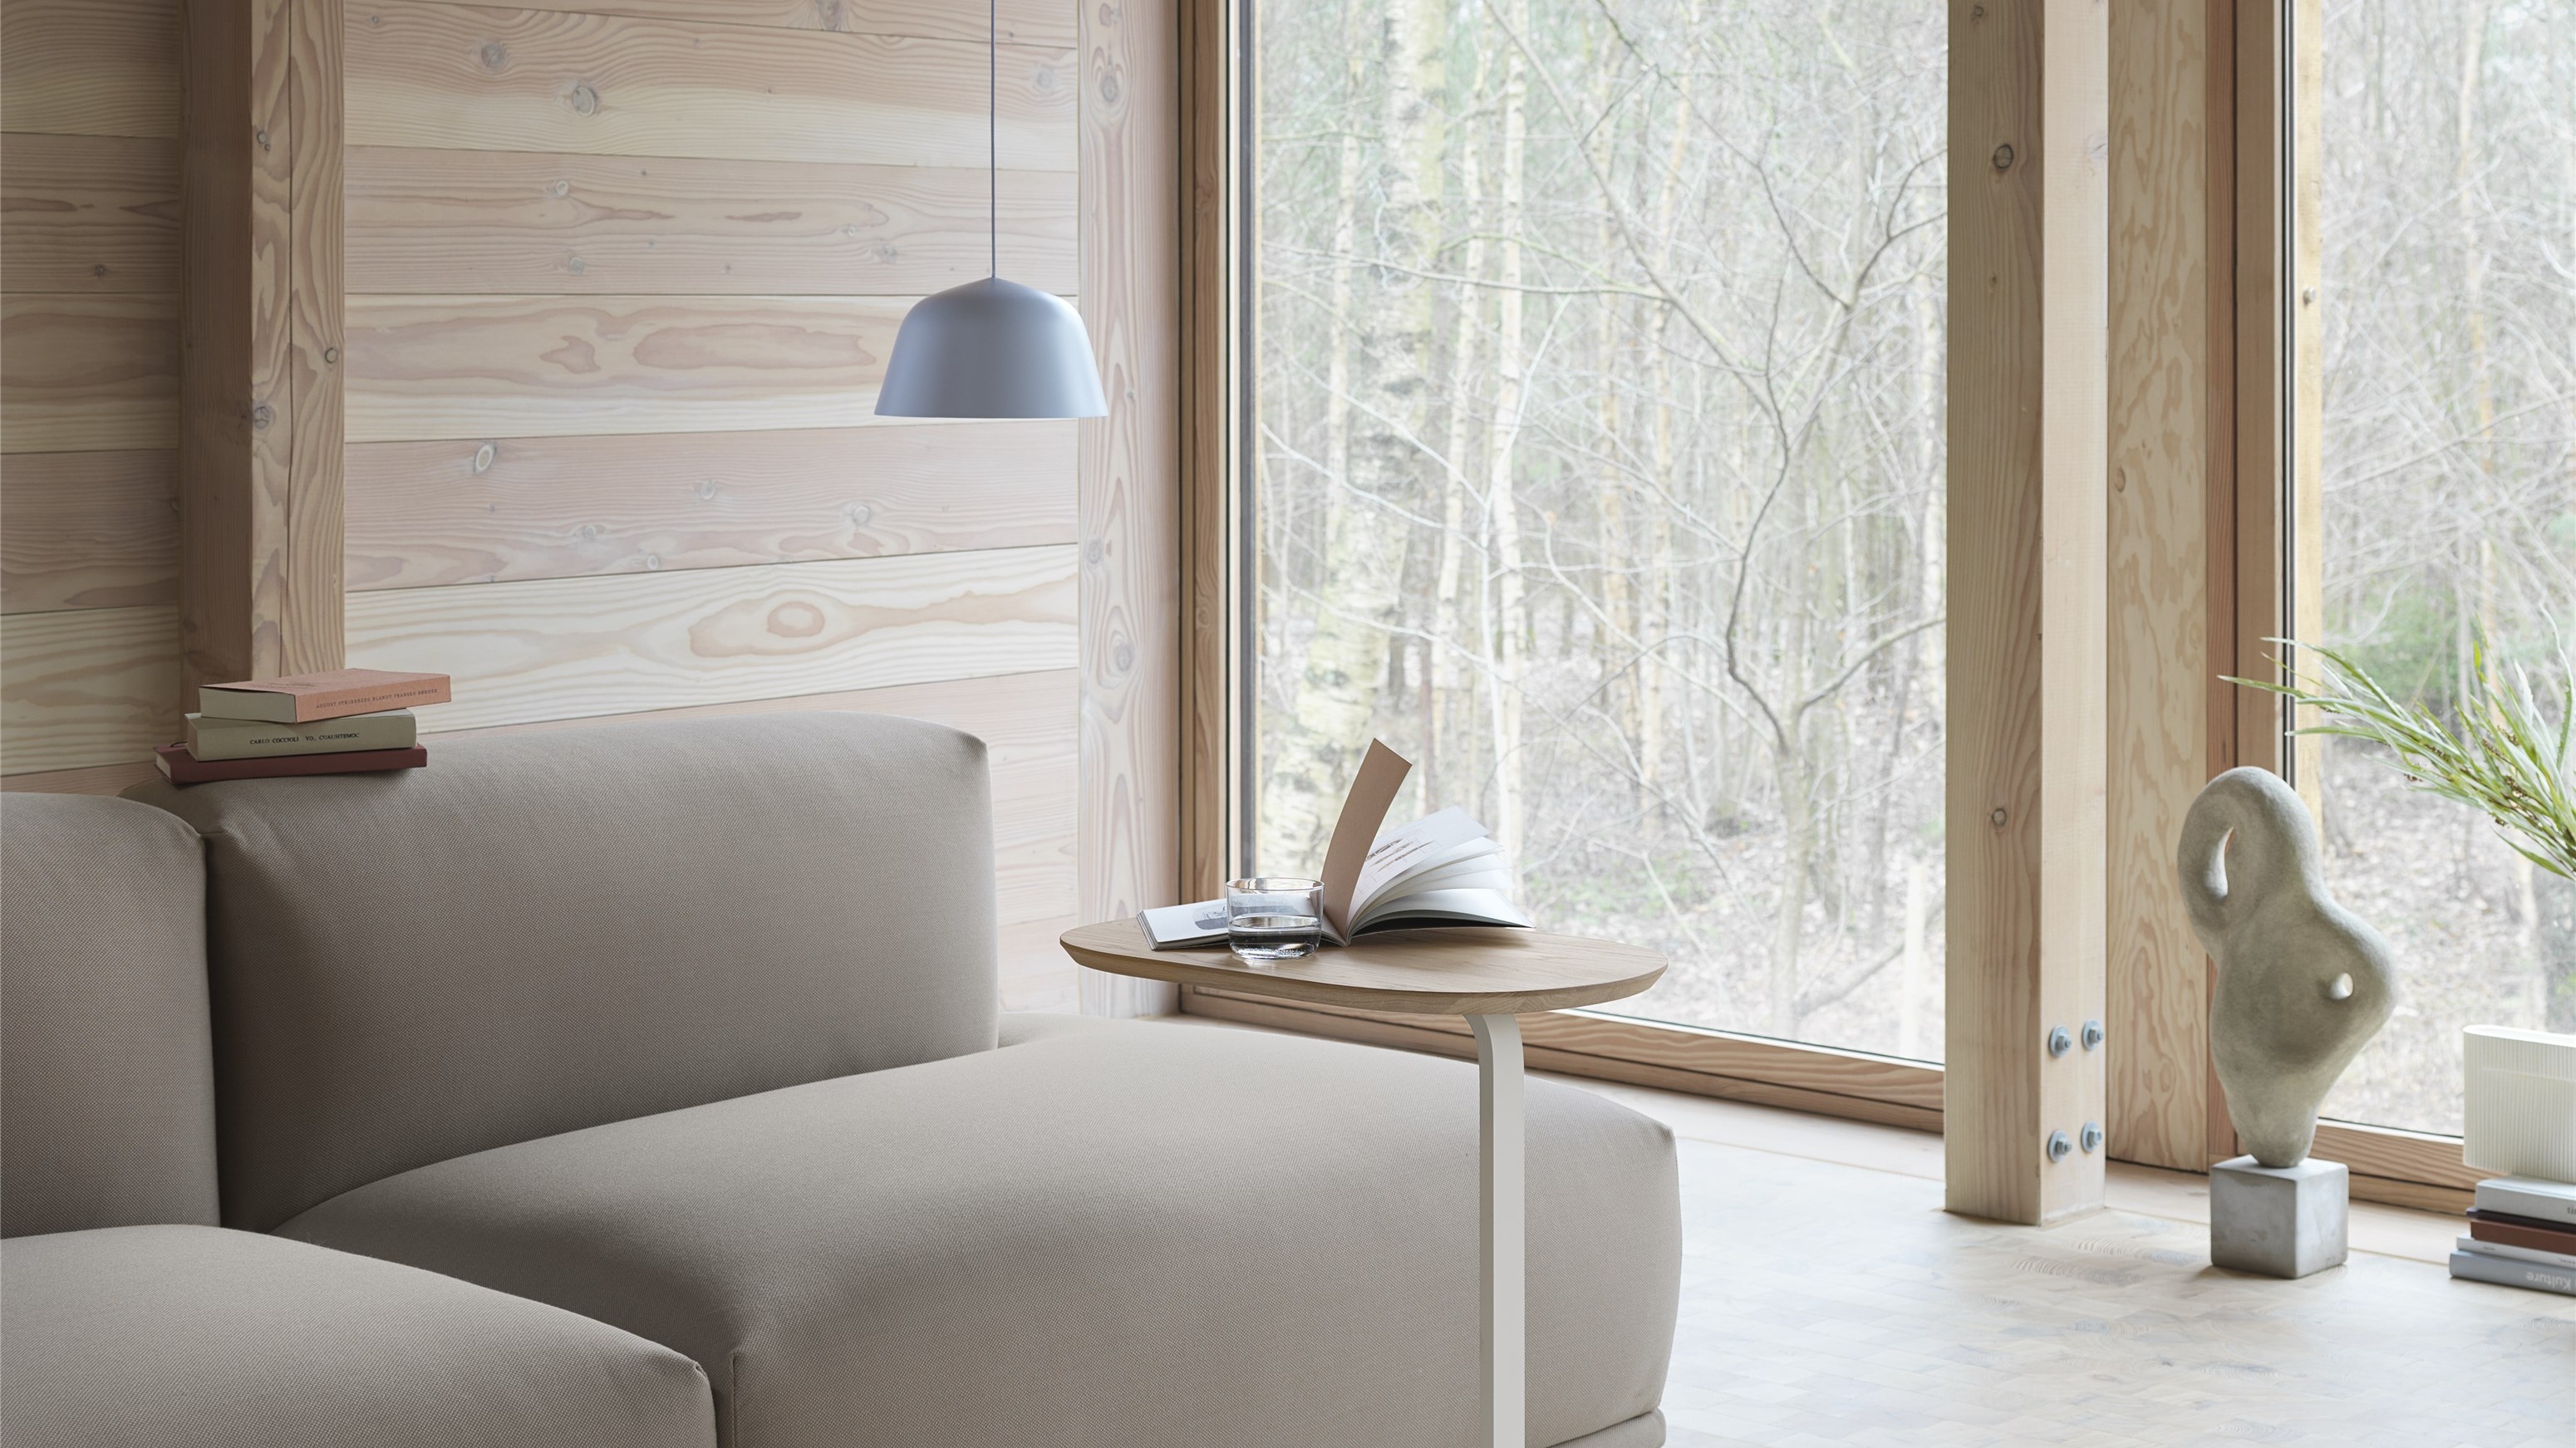 Style advice for your home from Muuto